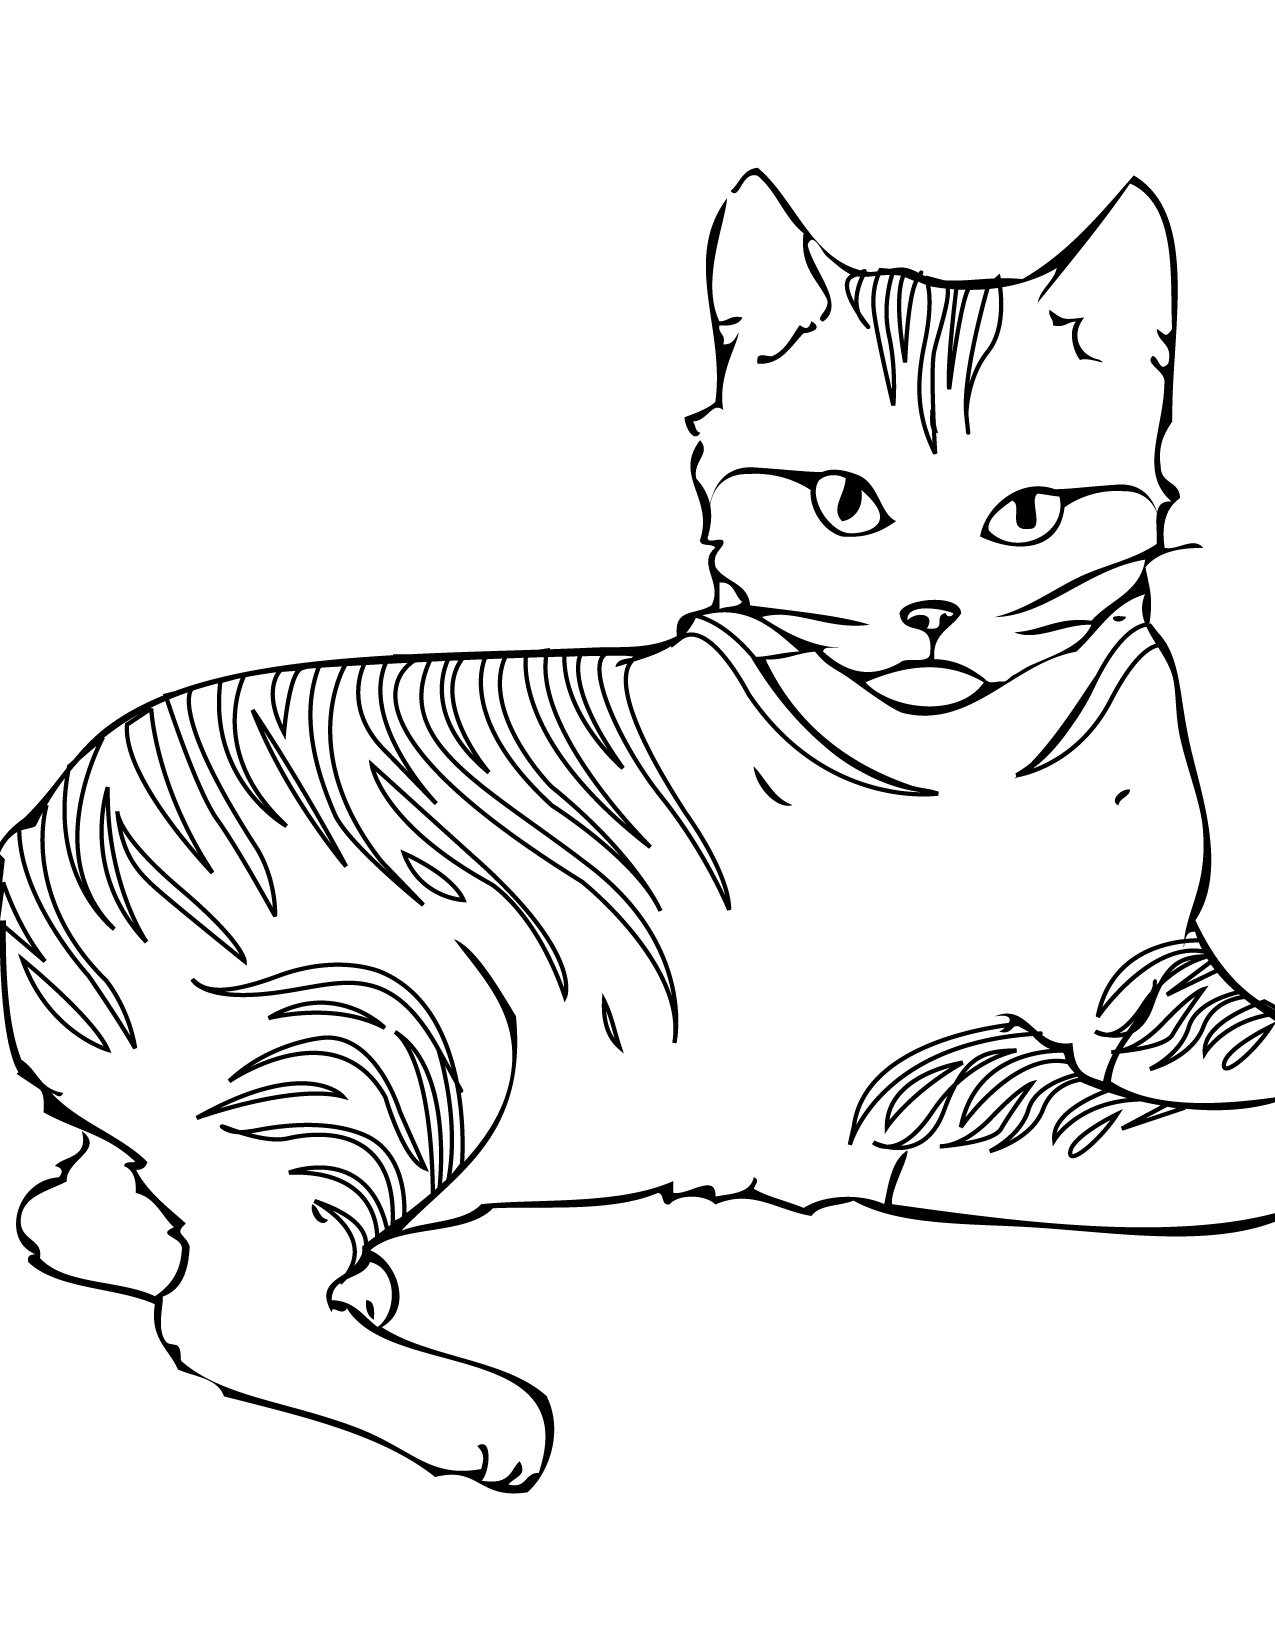 Printable Pictures To Color Cats